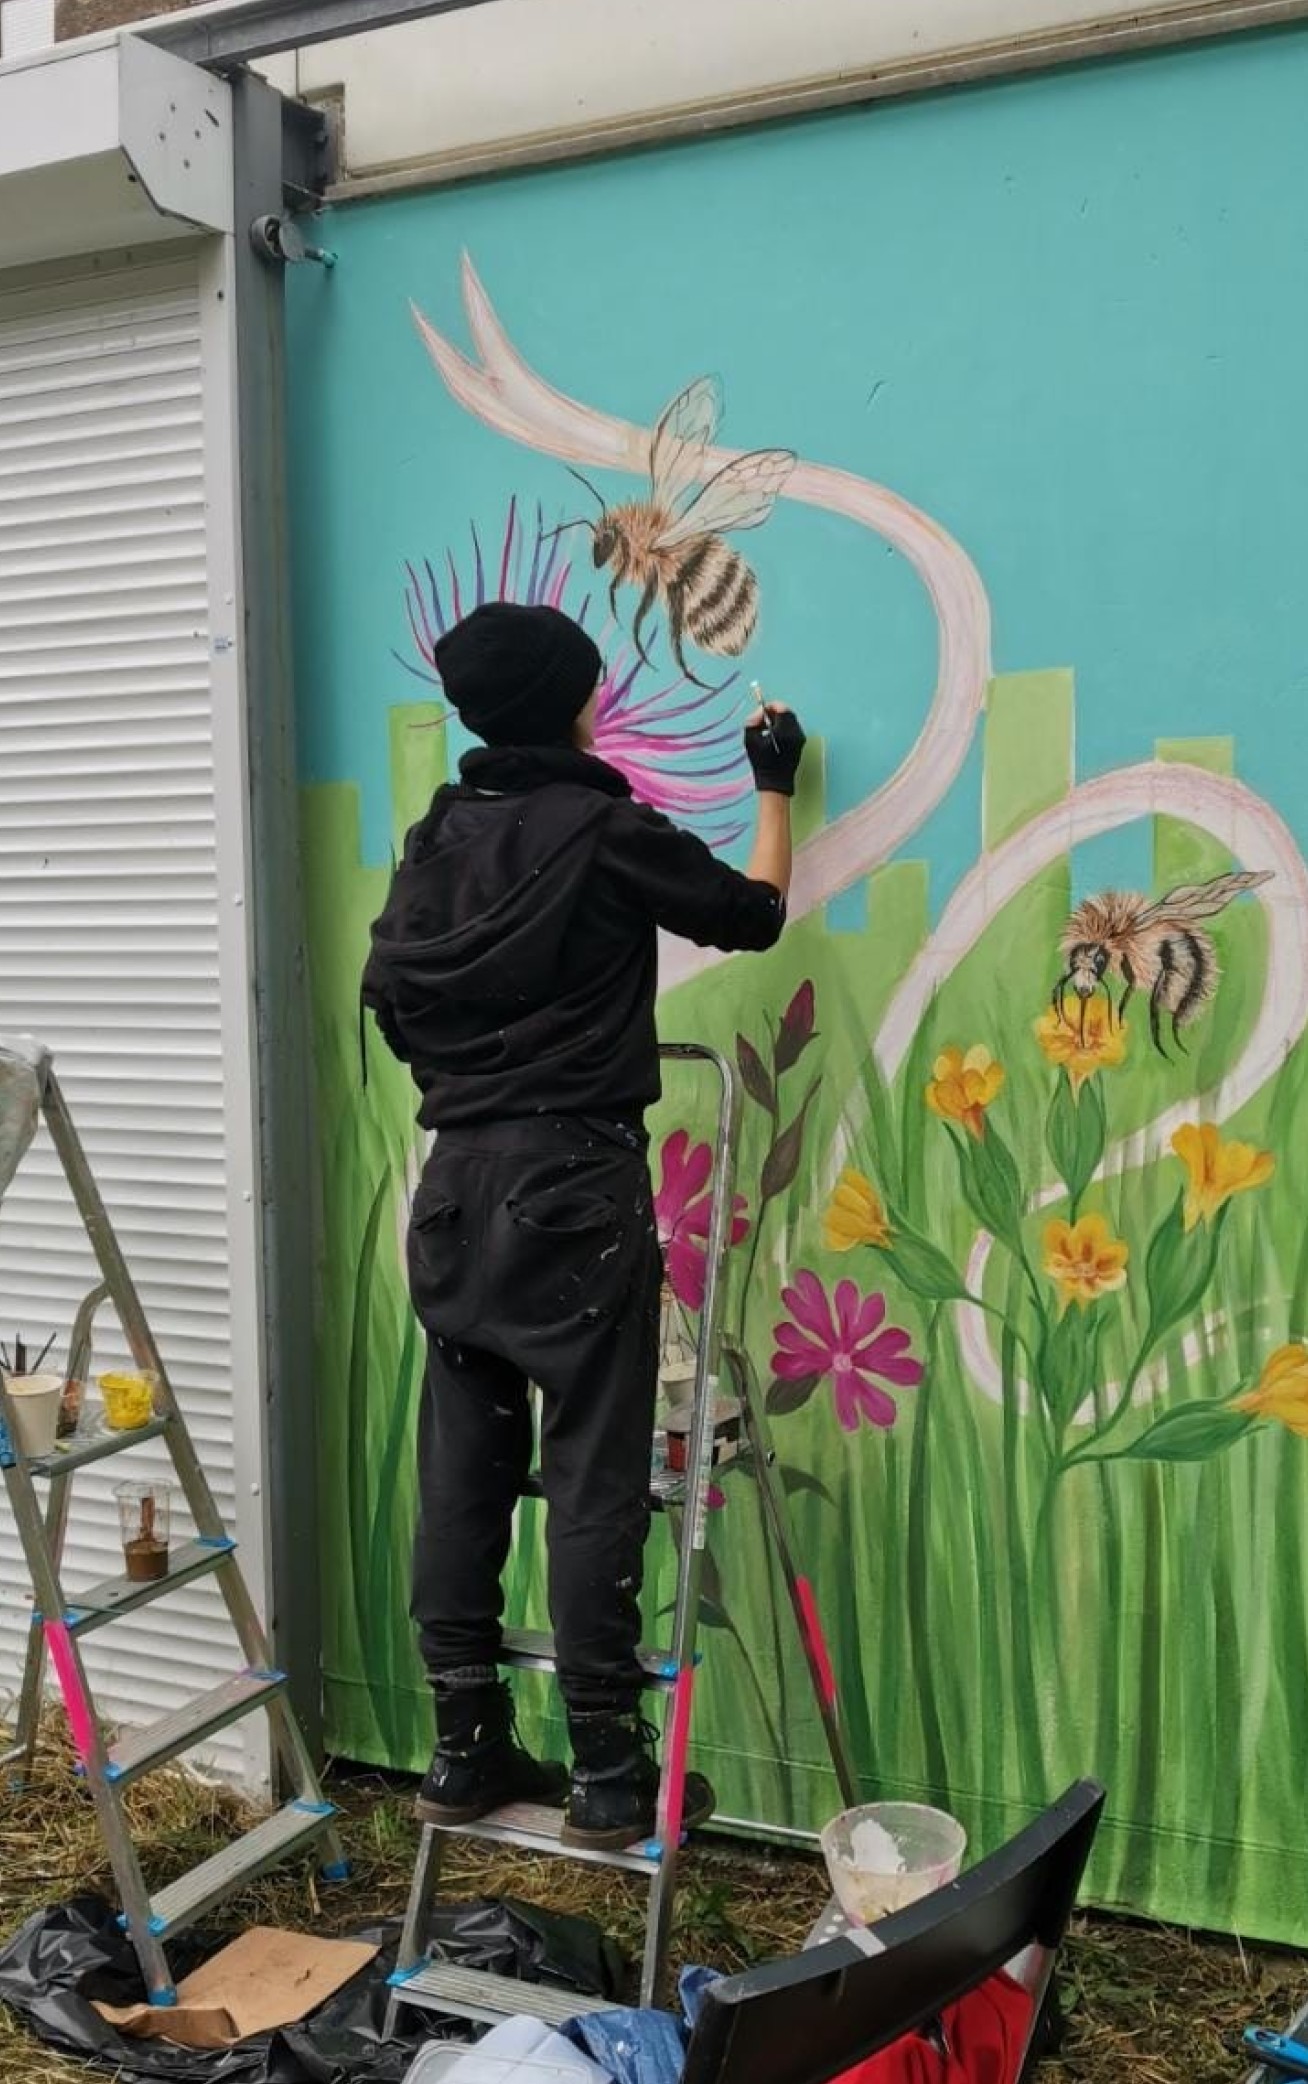 Photo showing East London artist Michelle Meola painting the wall mural in Tower Hamlets Cemetary Park, she is dressed in black and surrounded by paint pots